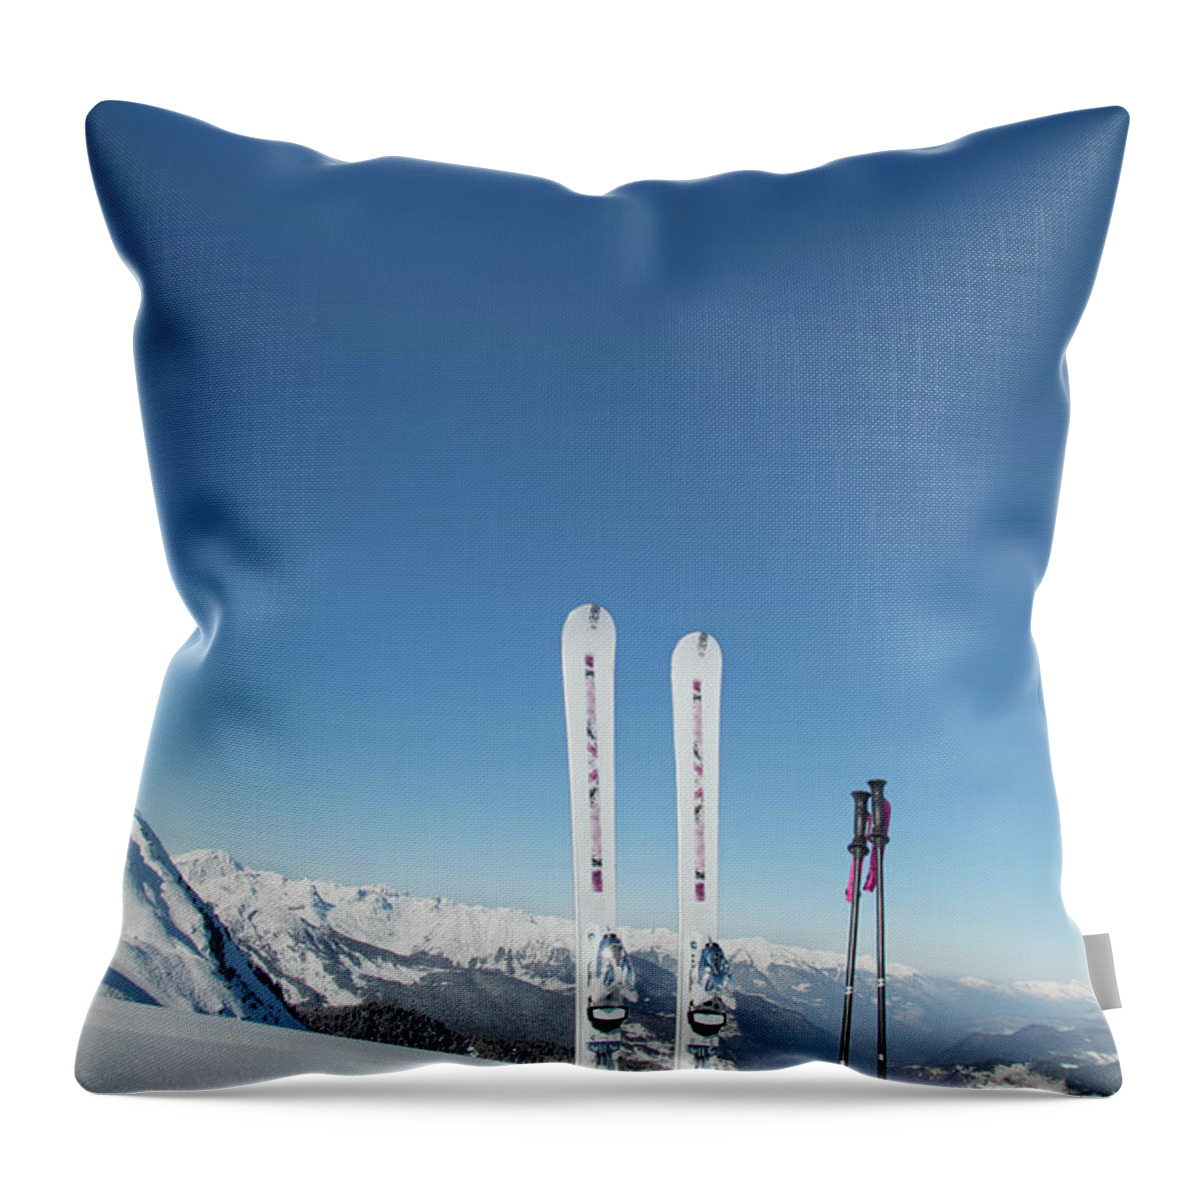 Ski Pole Throw Pillow featuring the photograph Skis And Ski Poles Stuck In The Snow by L.a. Novia